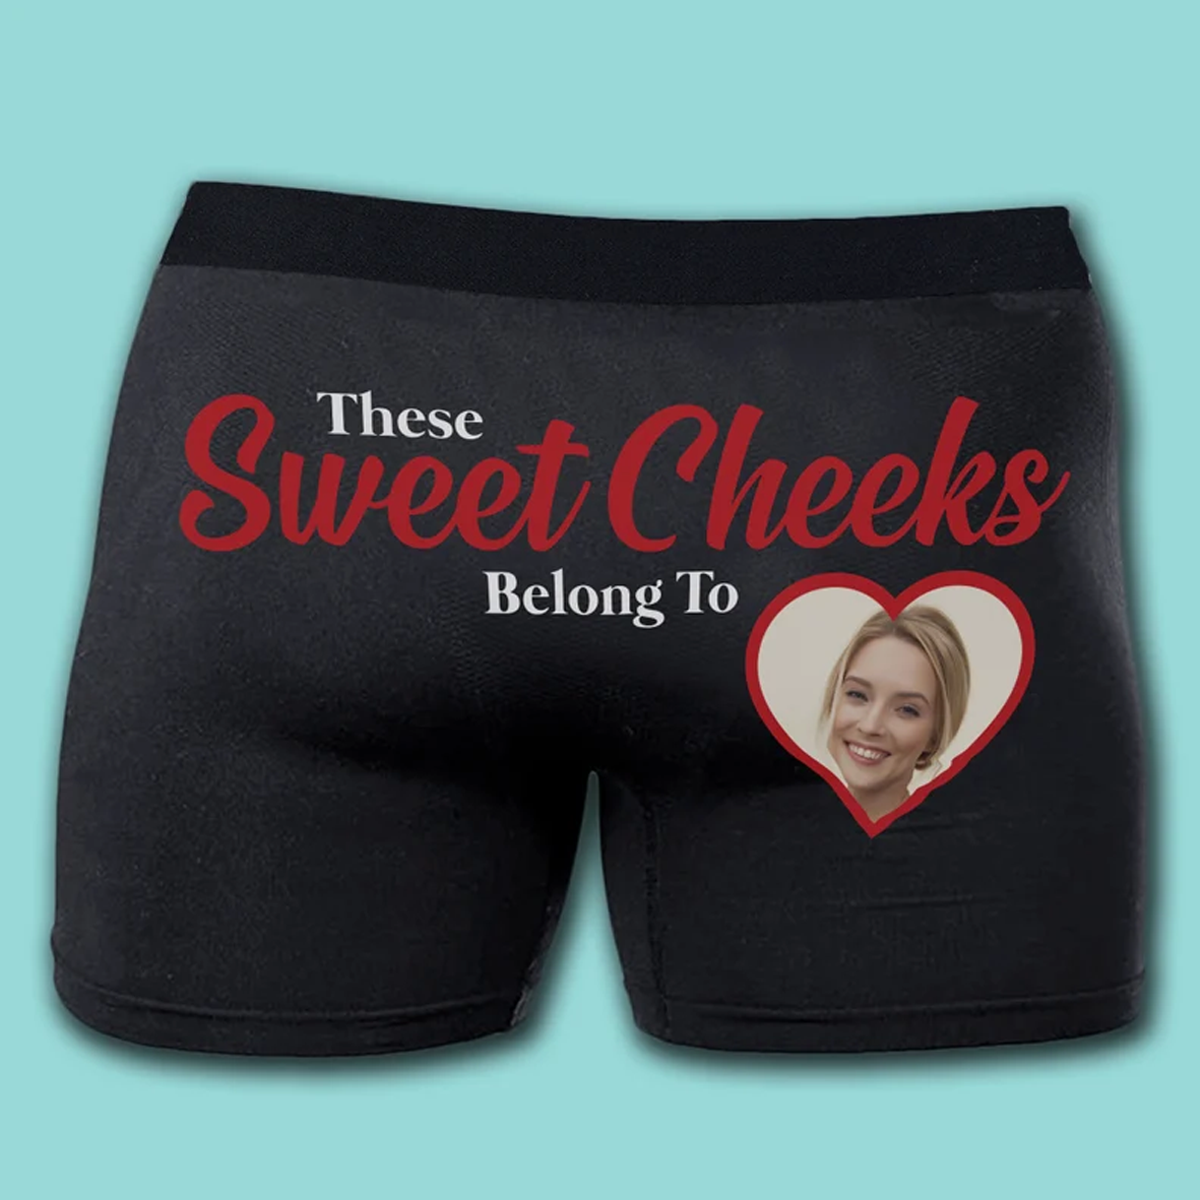 Personalised These Sweet Cheeks Belong To Photo Boxer Shorts/Trunks – A.C  designs ltd